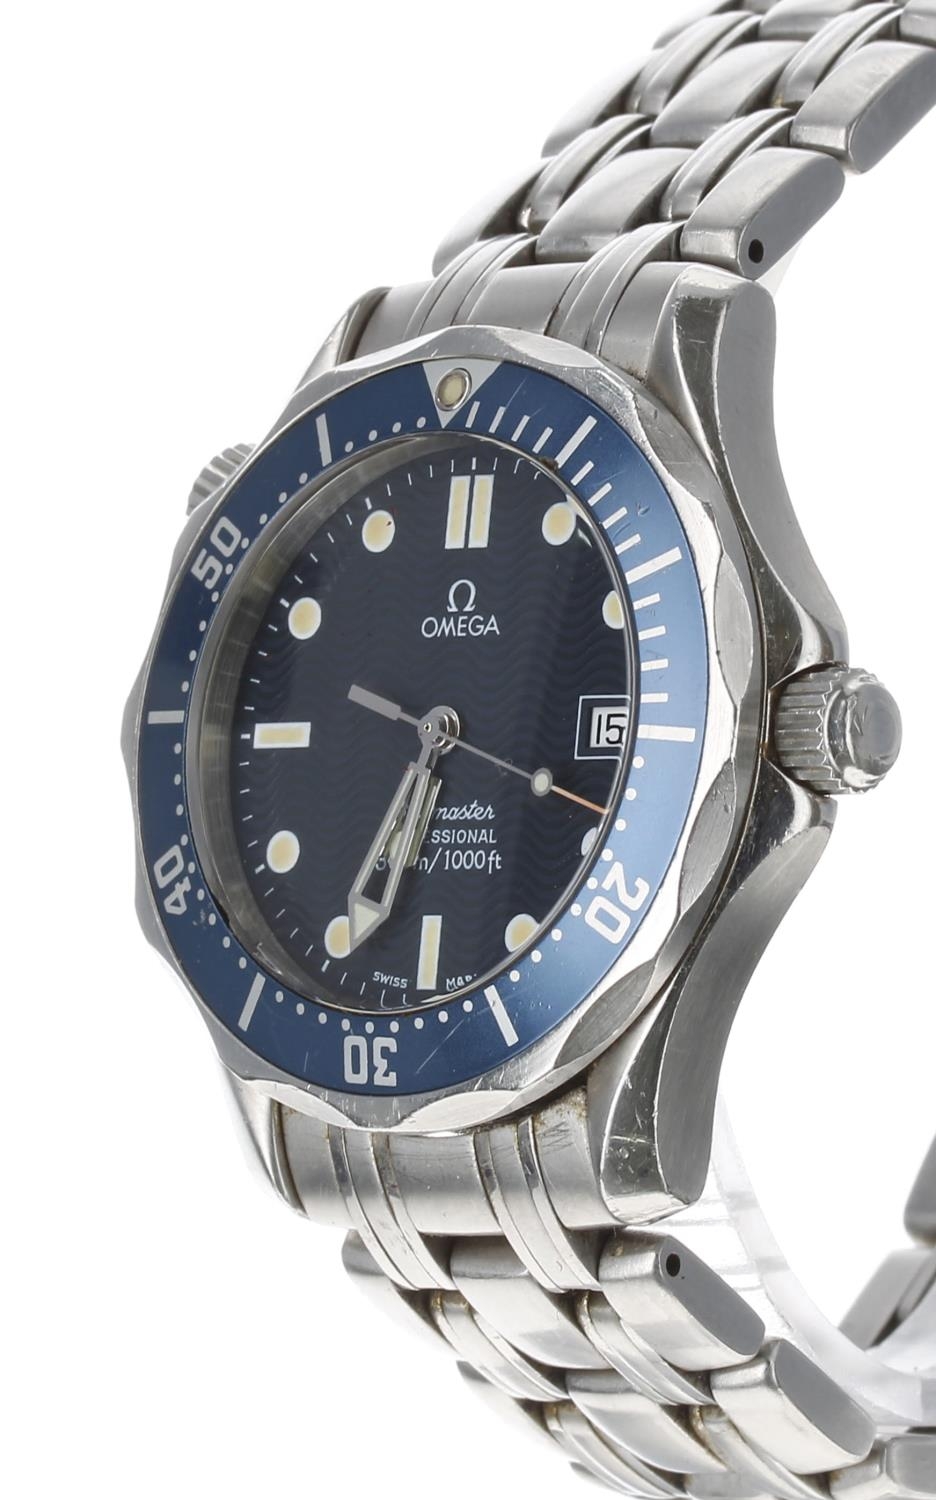 Omega Seamaster Professional 300m/1000ft stainless steel gentleman's wristwatch, reference no. 196. - Image 2 of 5